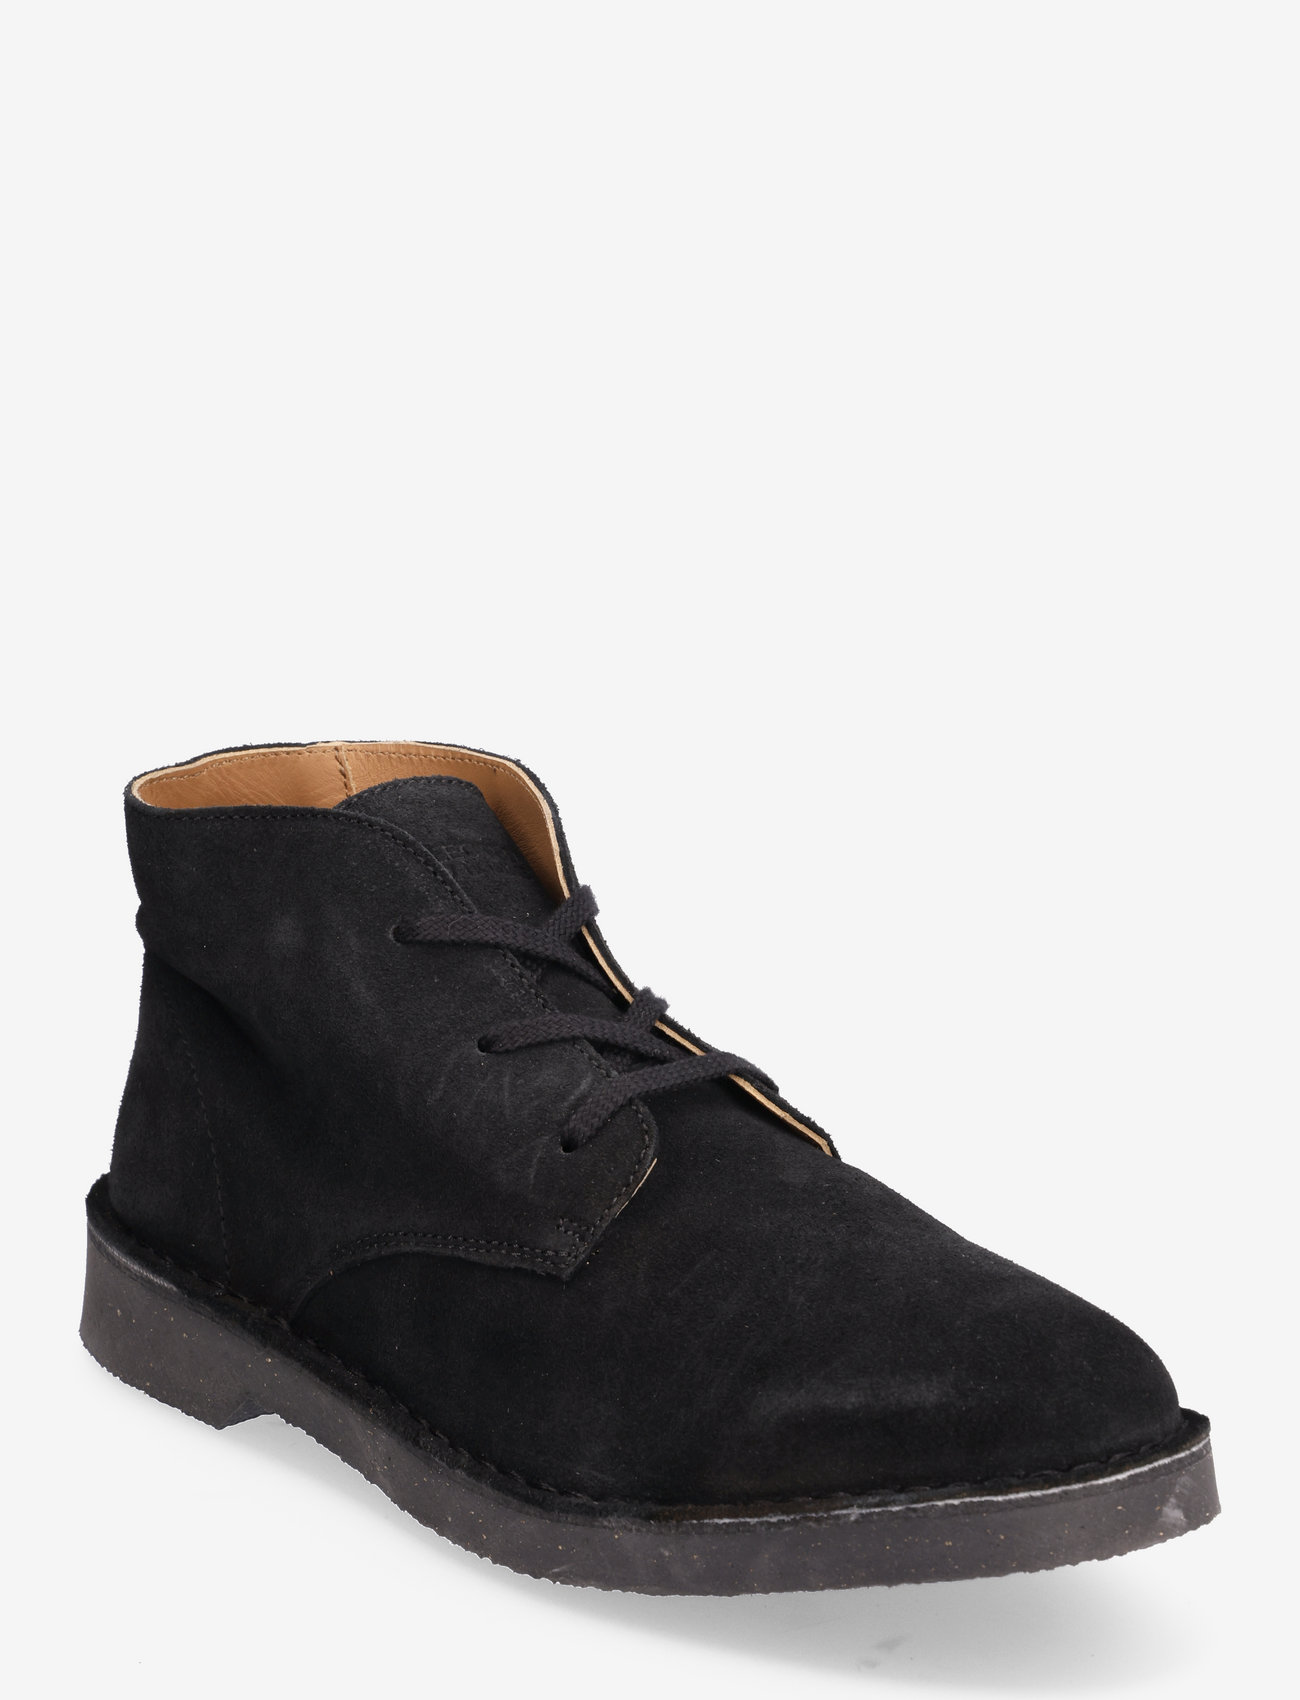 Selected Homme - SLHRIGA NEW SUEDE CHUKKA BOOT B - desert boots - black - 0